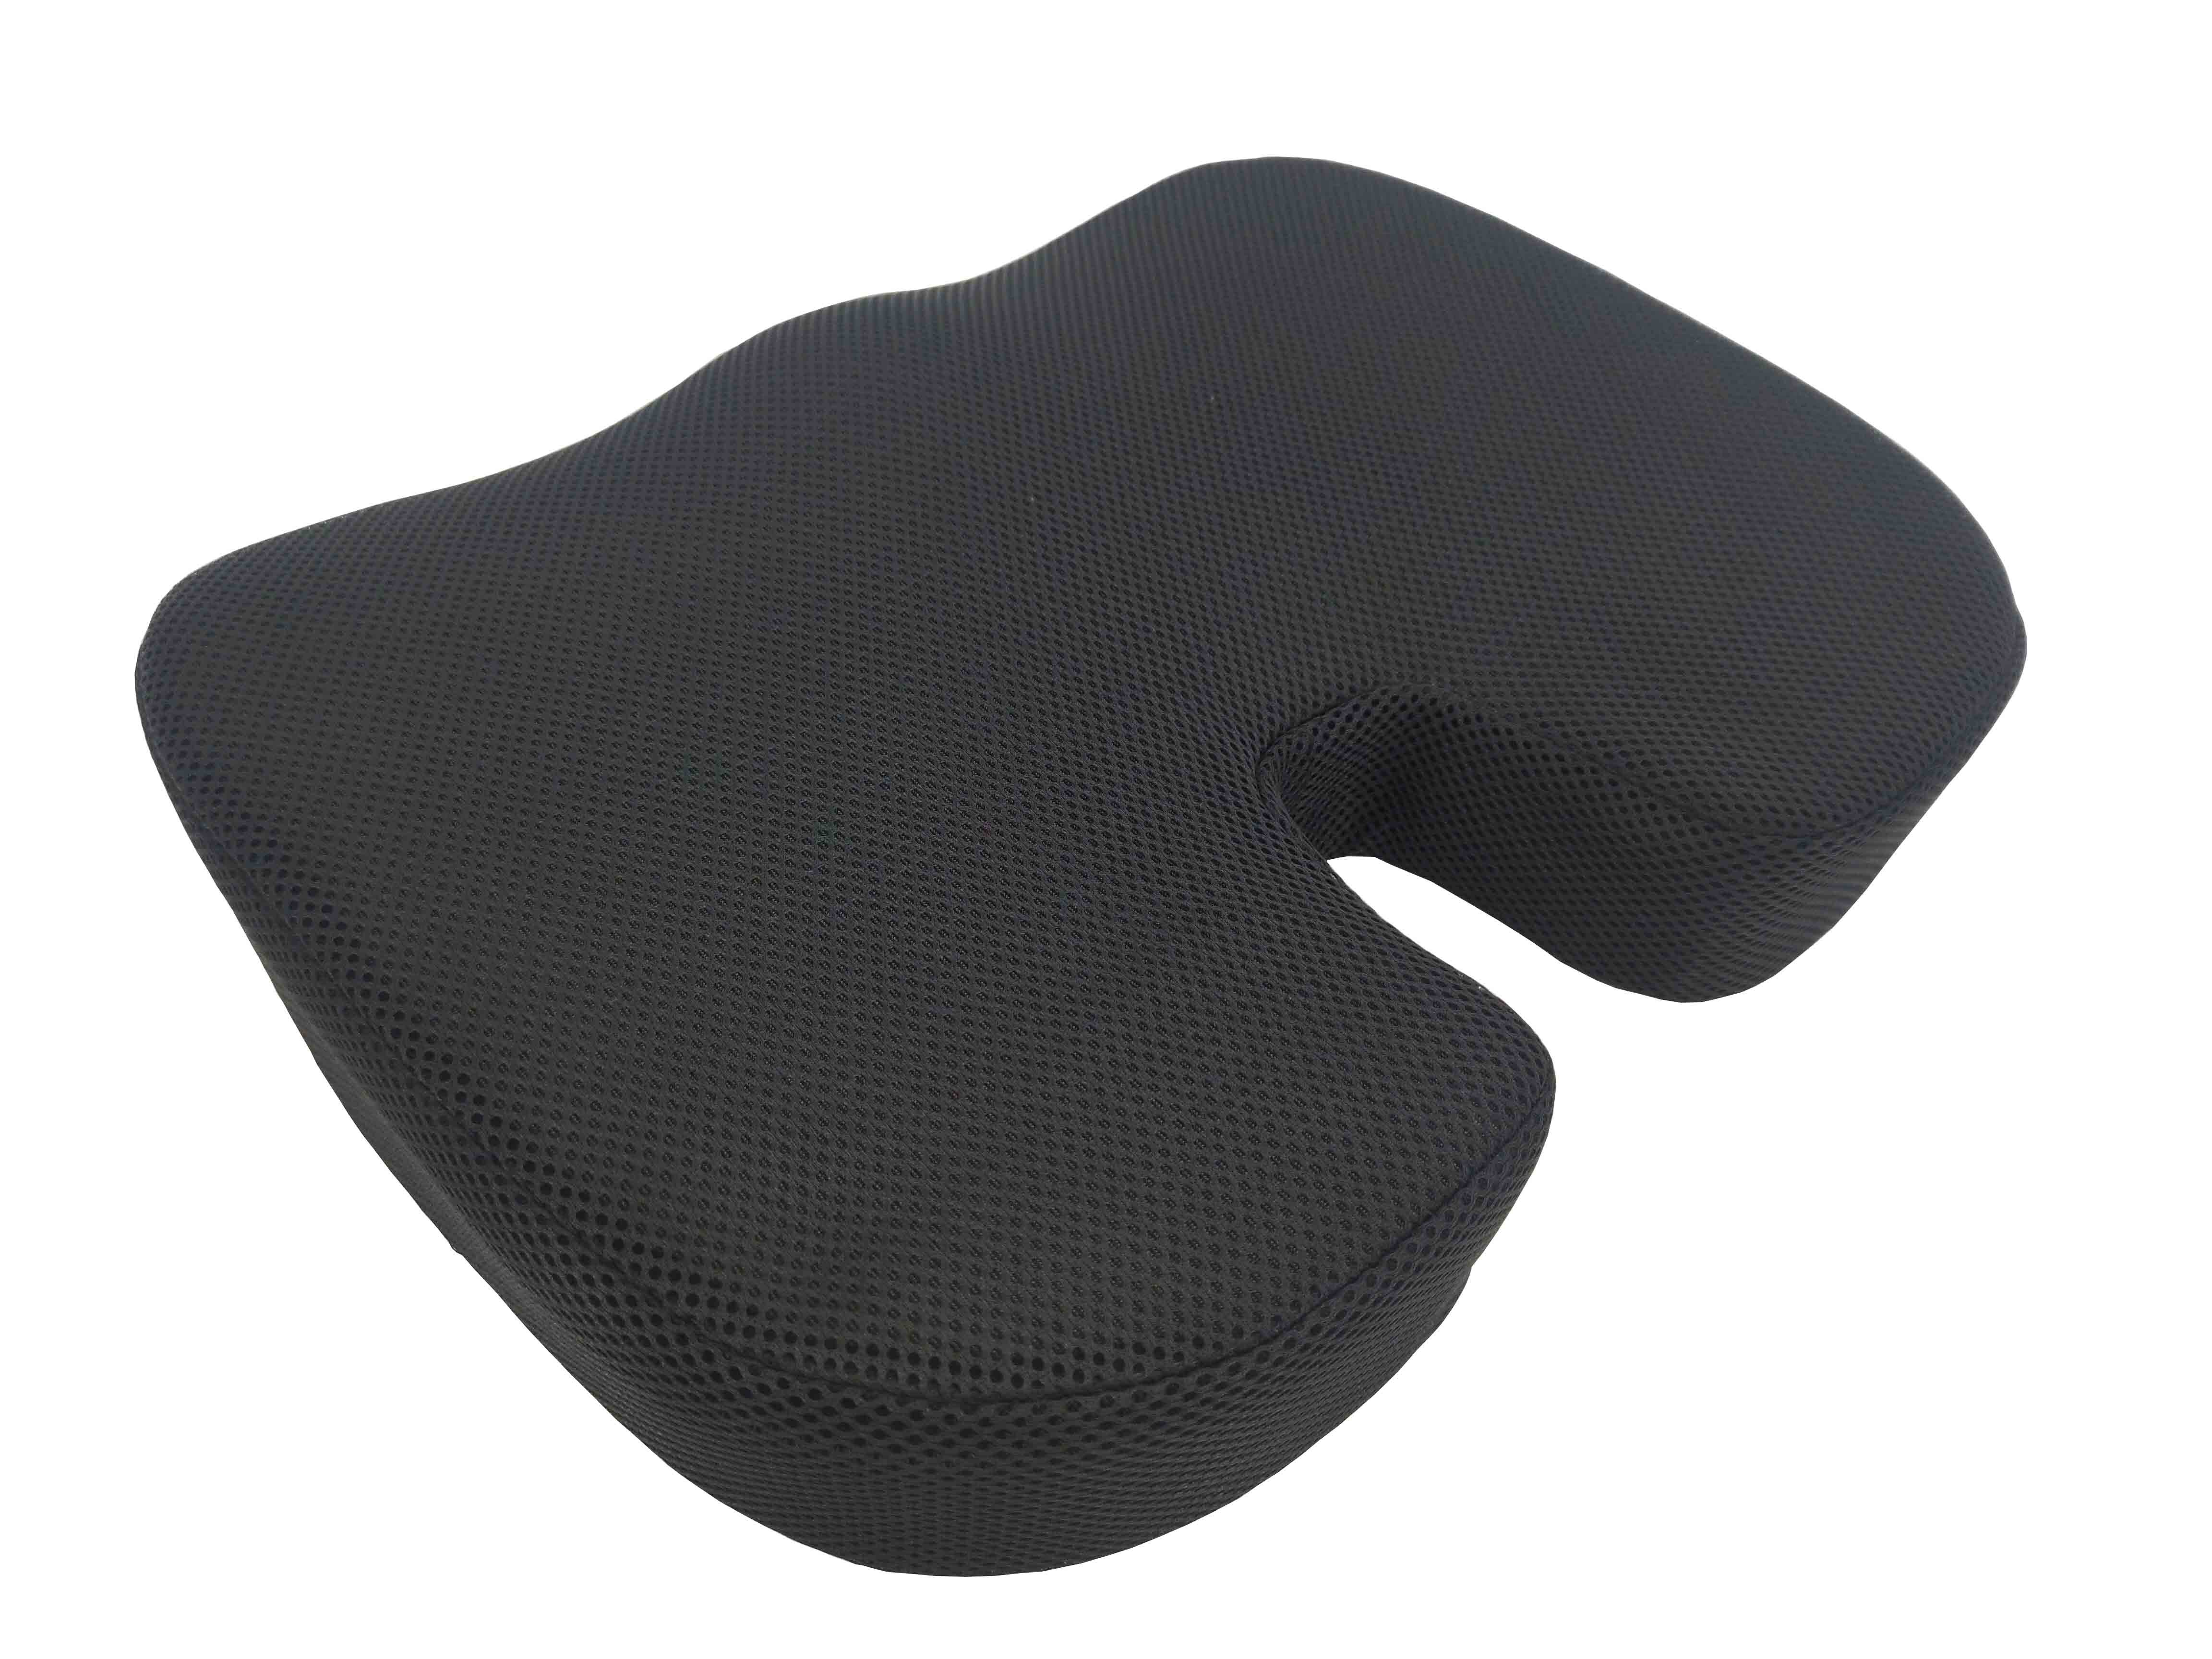 Waoaw Seat Cushion, Office Chair Cushions Butt Pillow for Long Sitting, Memory Foam Chair Pad for Back, Coccyx, Tailbone Pain Relief